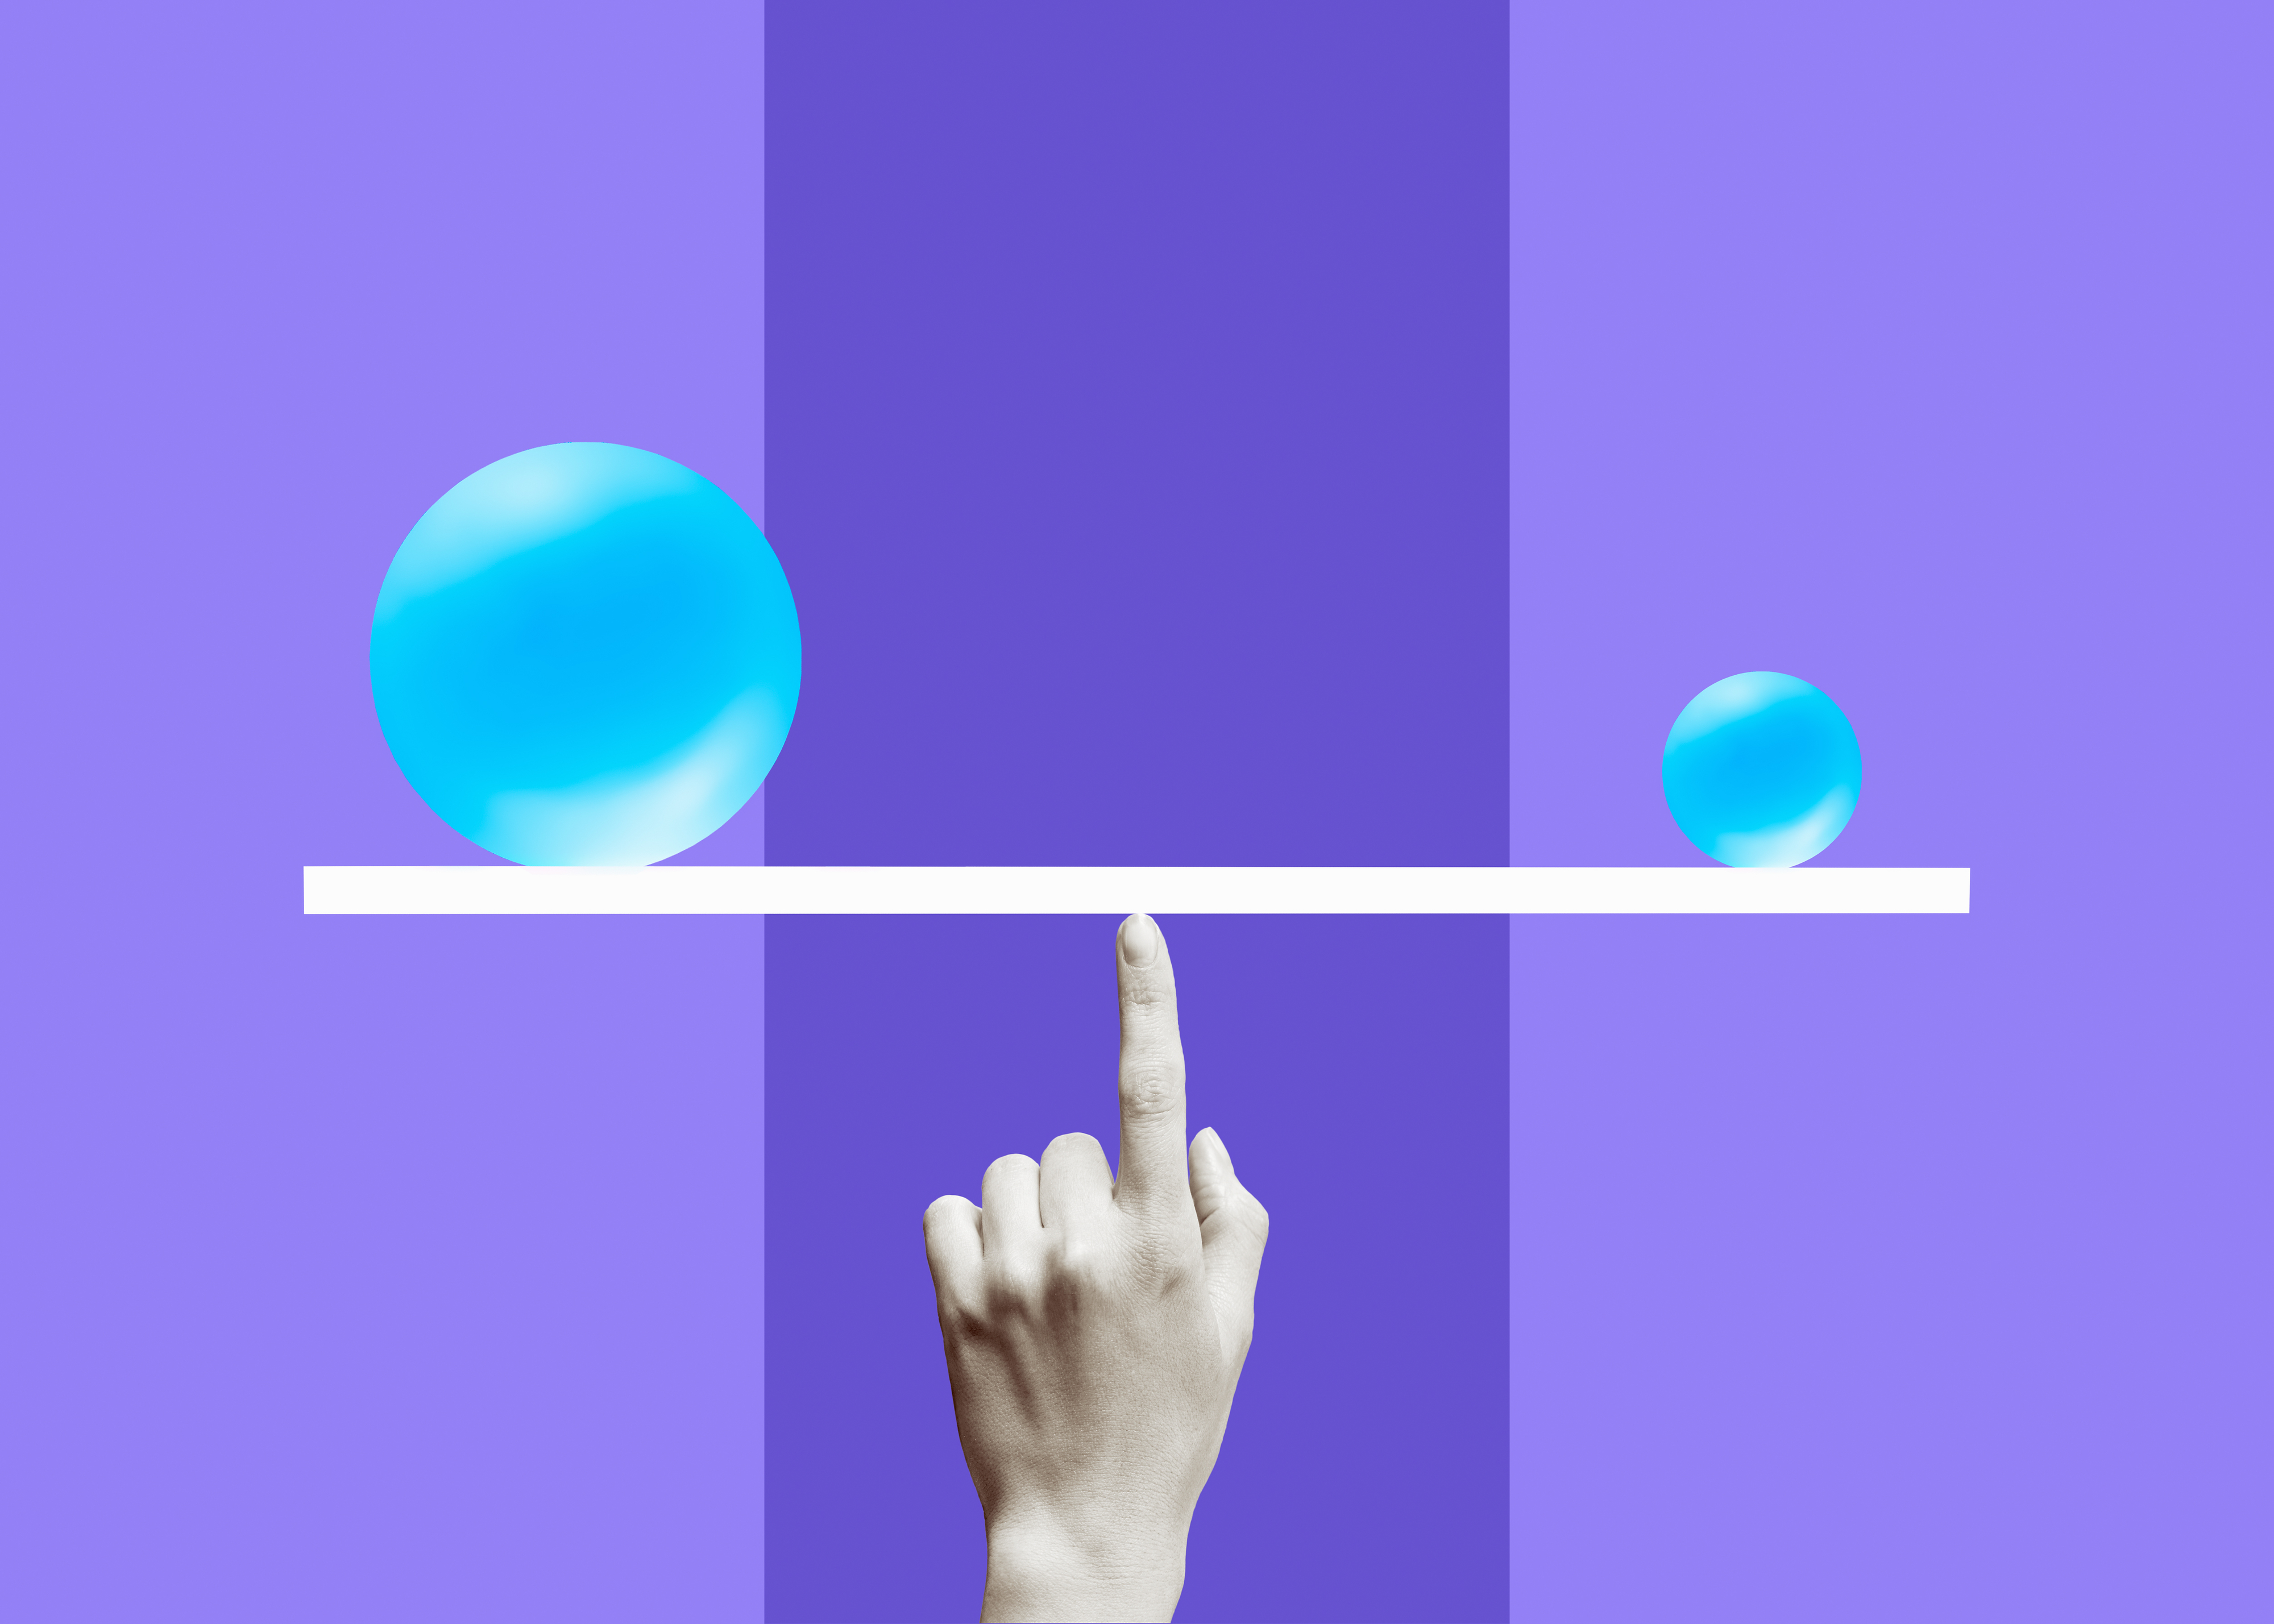 Person balancing two balls on a stick on their index finger